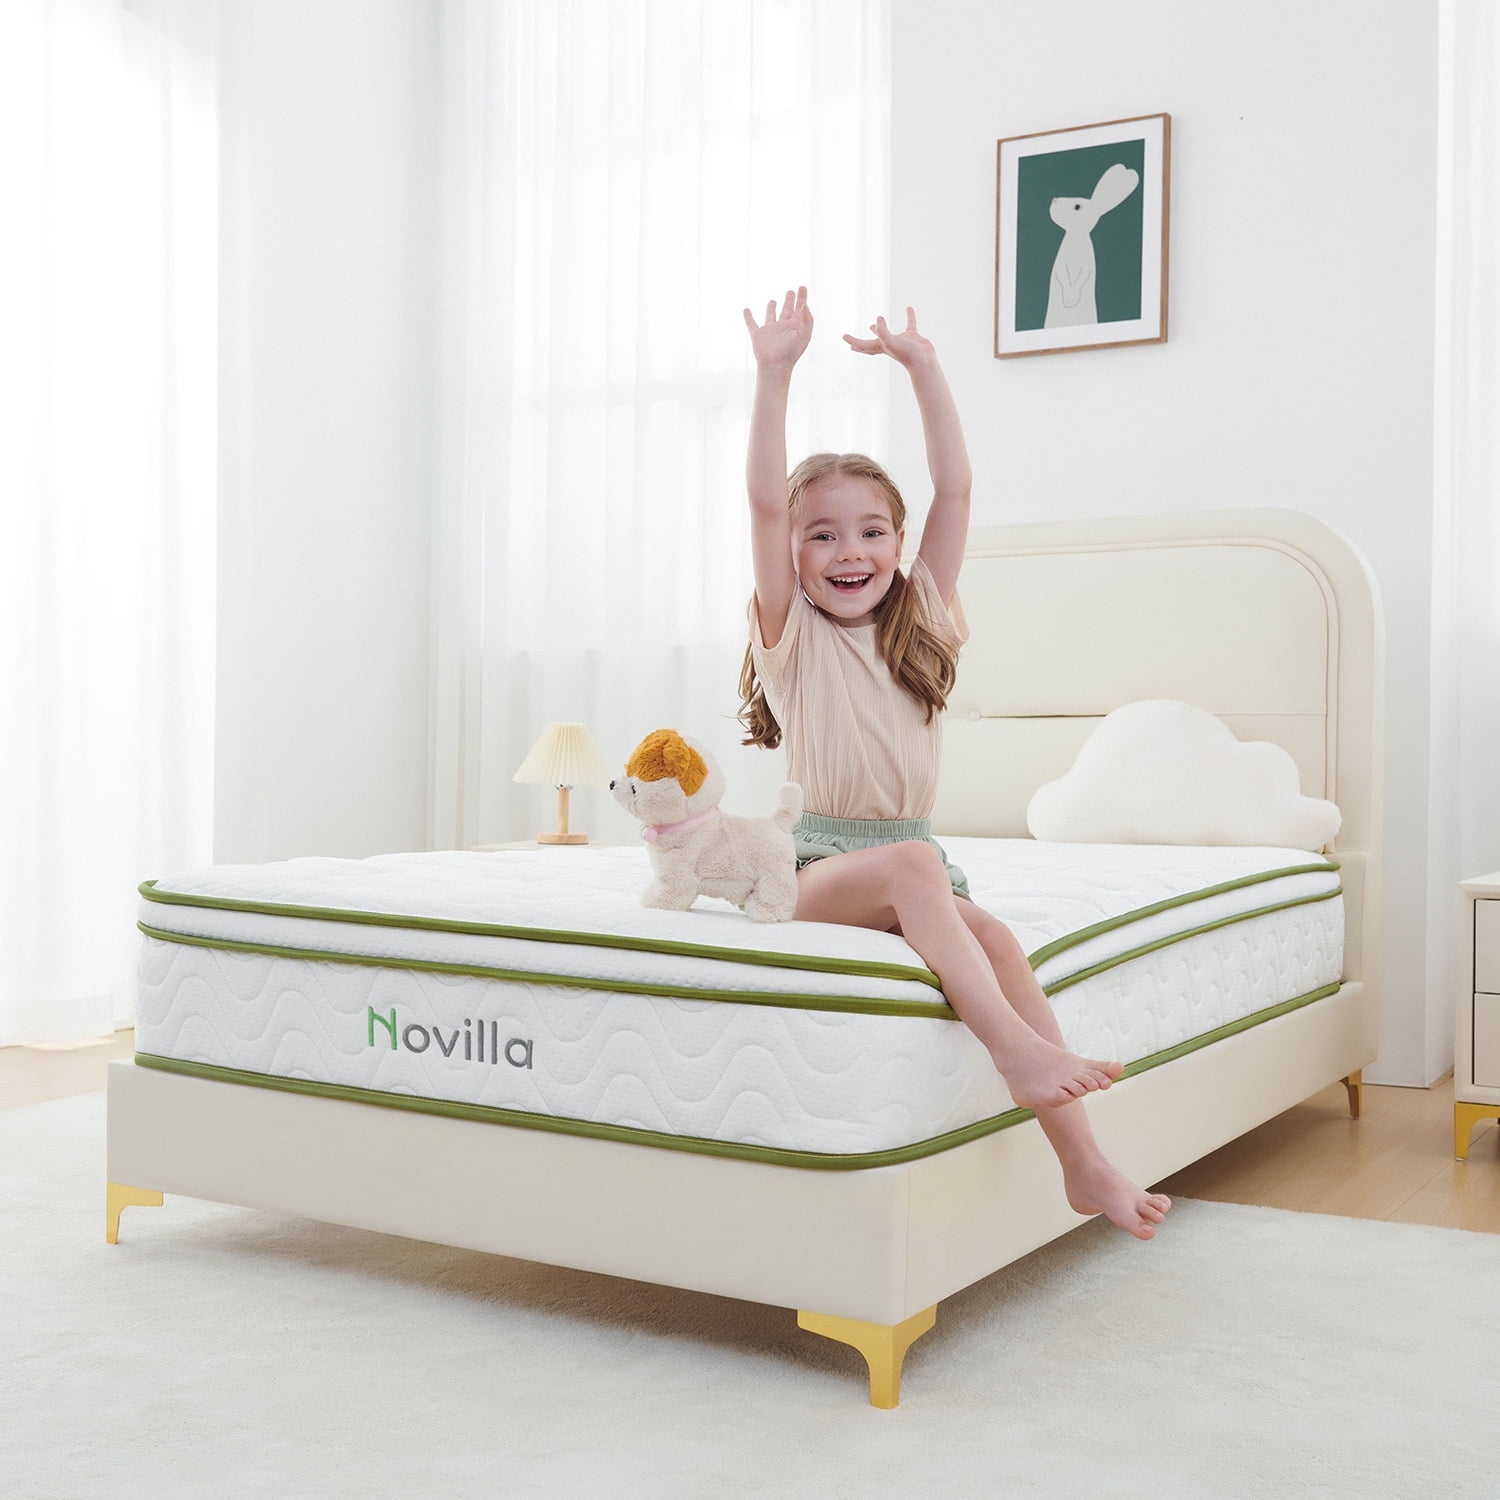 Sweetnight Cooling Twin Medium Firm Memory Foam 12 in. Mattress, Support and Breathable, Multi-Colored